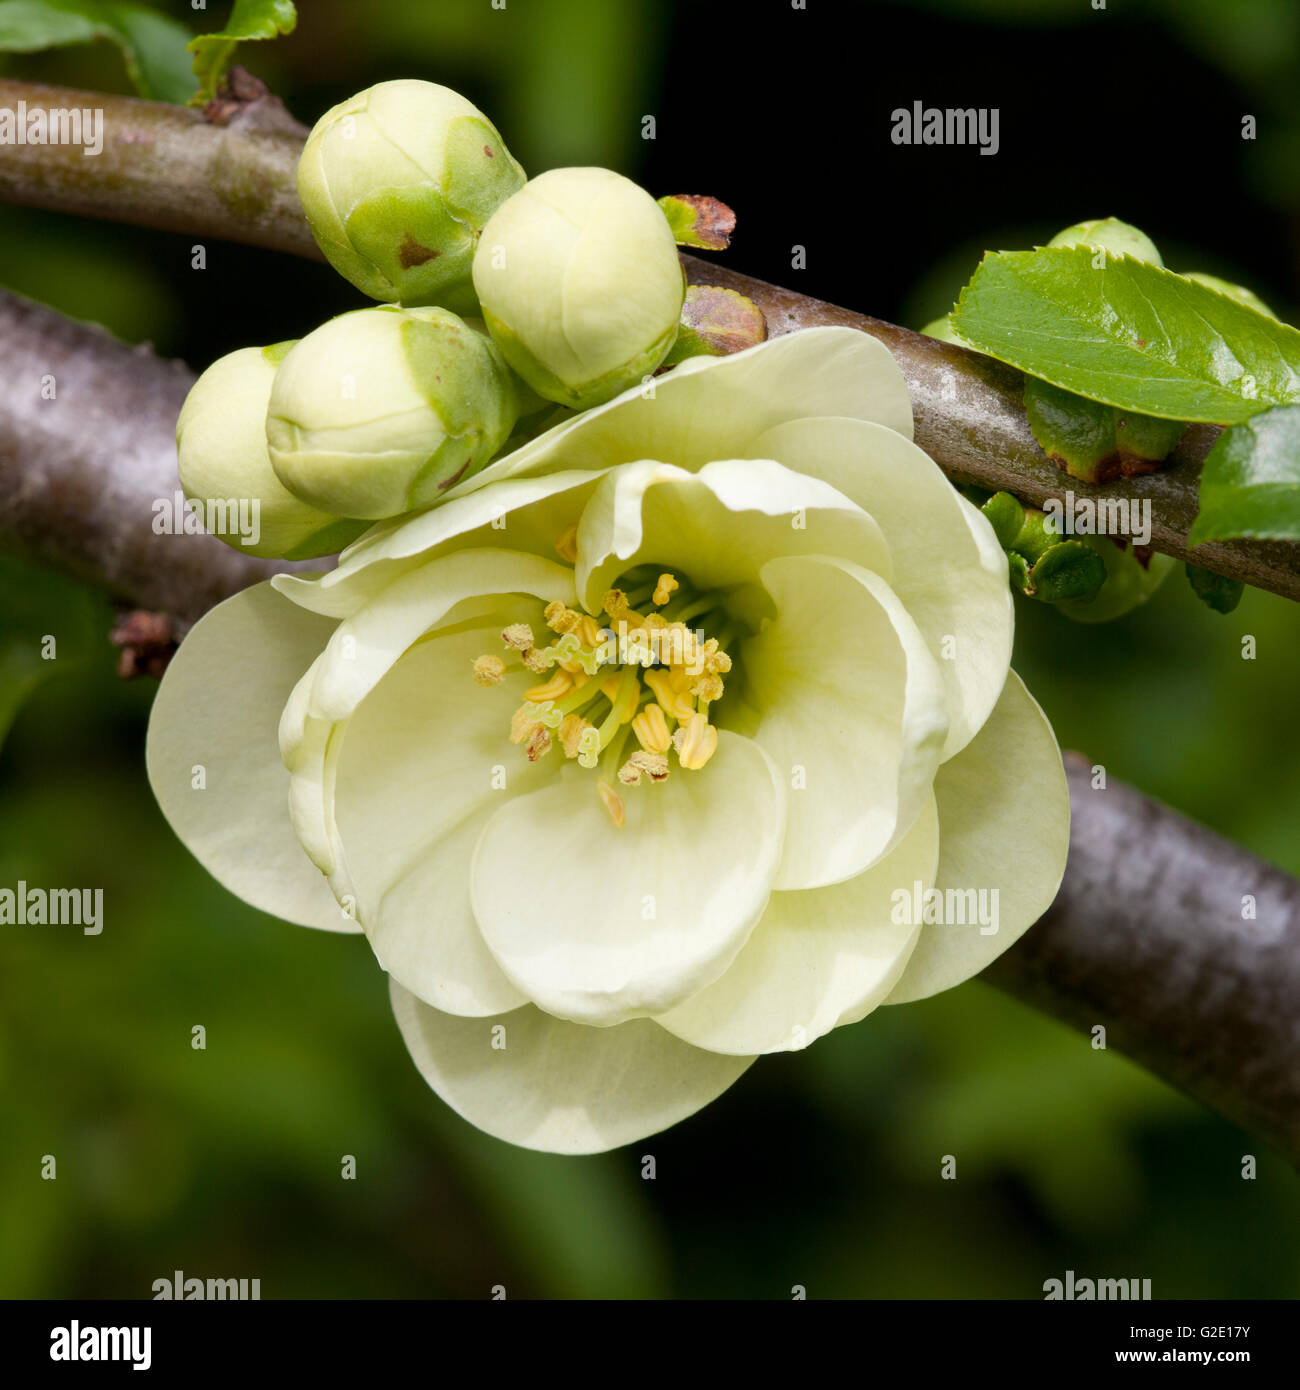 Flowering Quince (Chaenomeles x superba), flower and buds, Germany Stock Photo